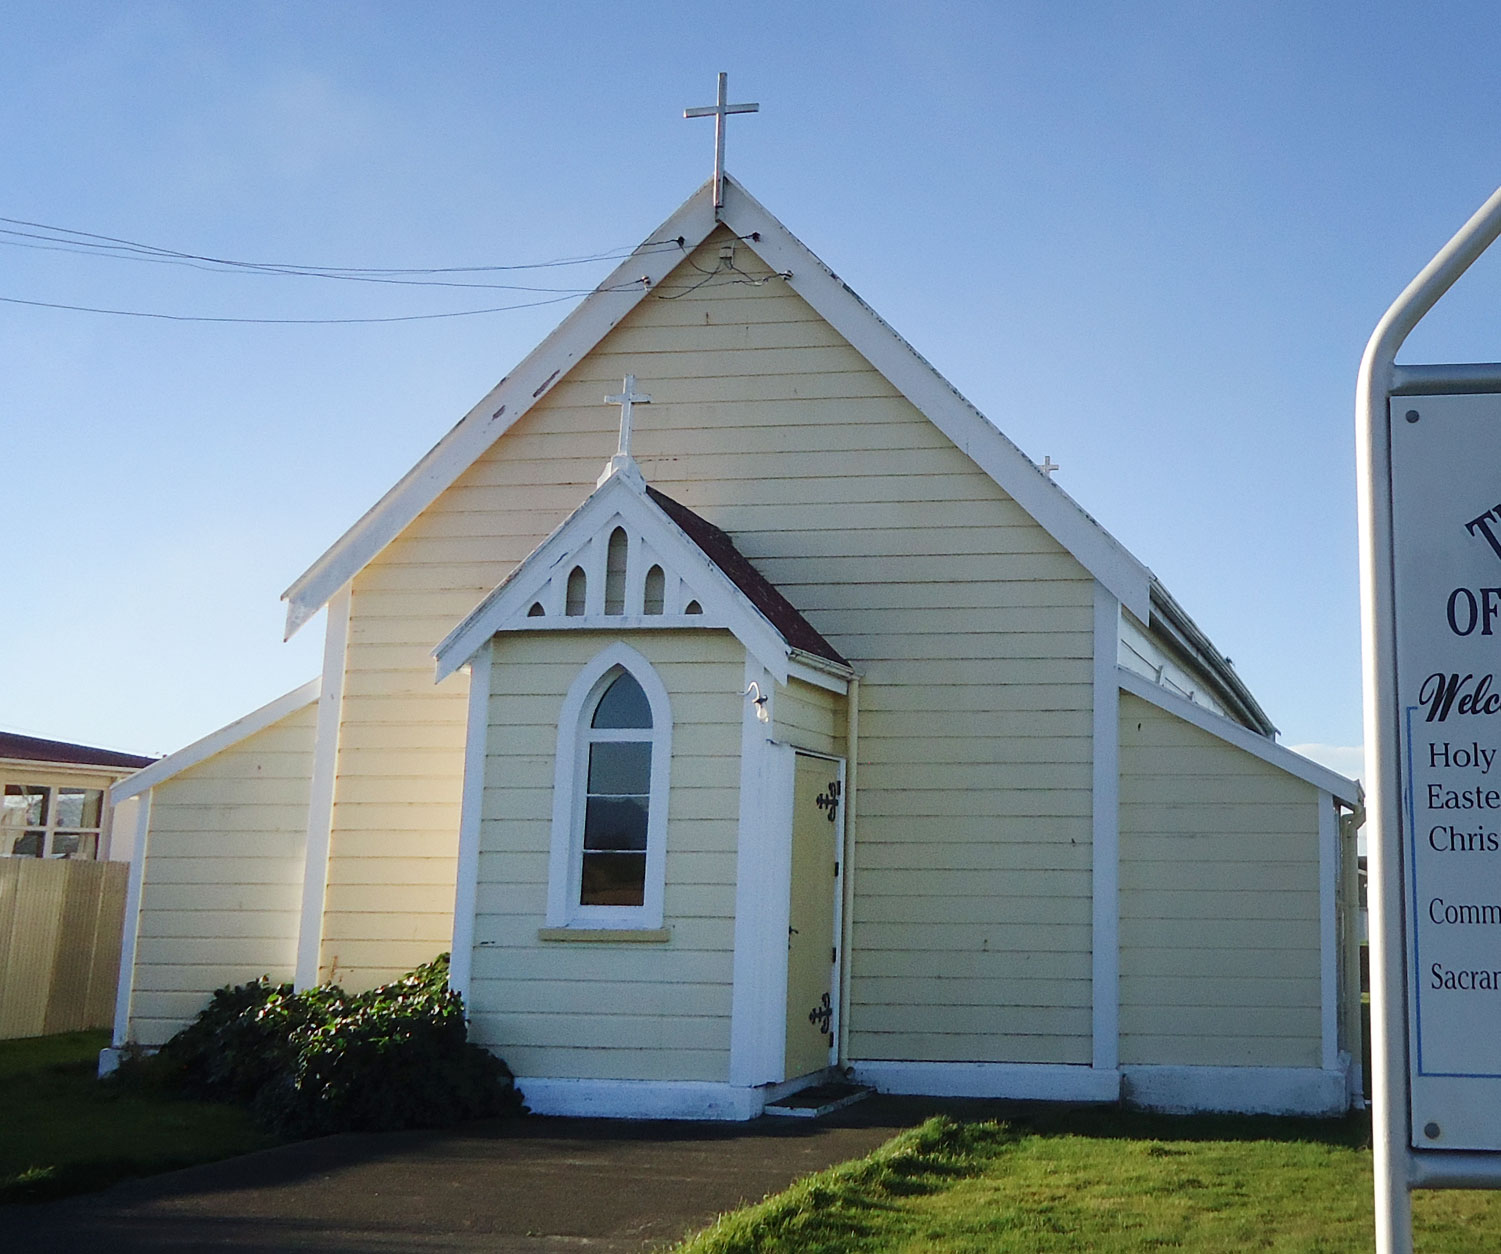 Quake too much for Seddon crucifix Archdiocese of Wellington